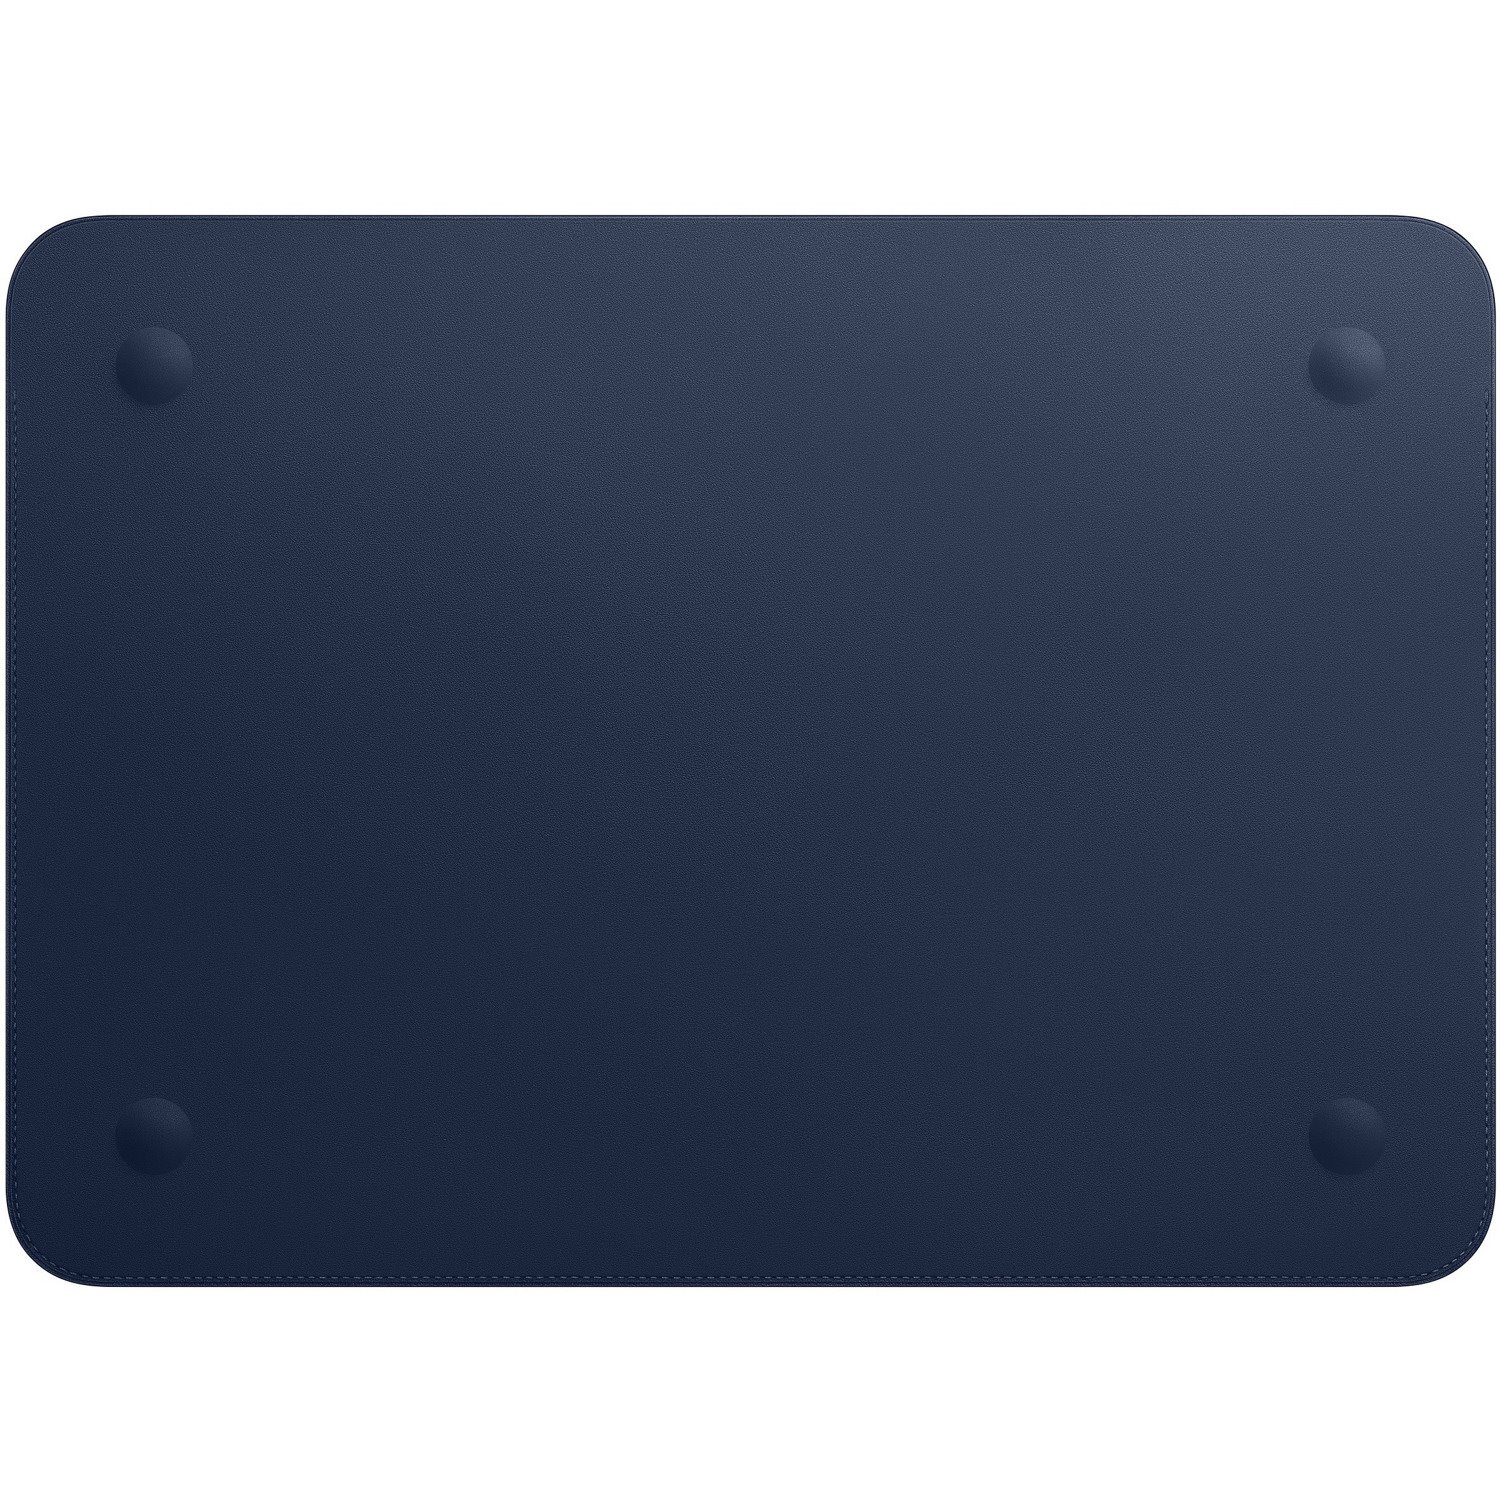 Apple Leather Sleeve Carrying Case (Sleeve) for 33 cm (13") MacBook Pro - Midnight Blue